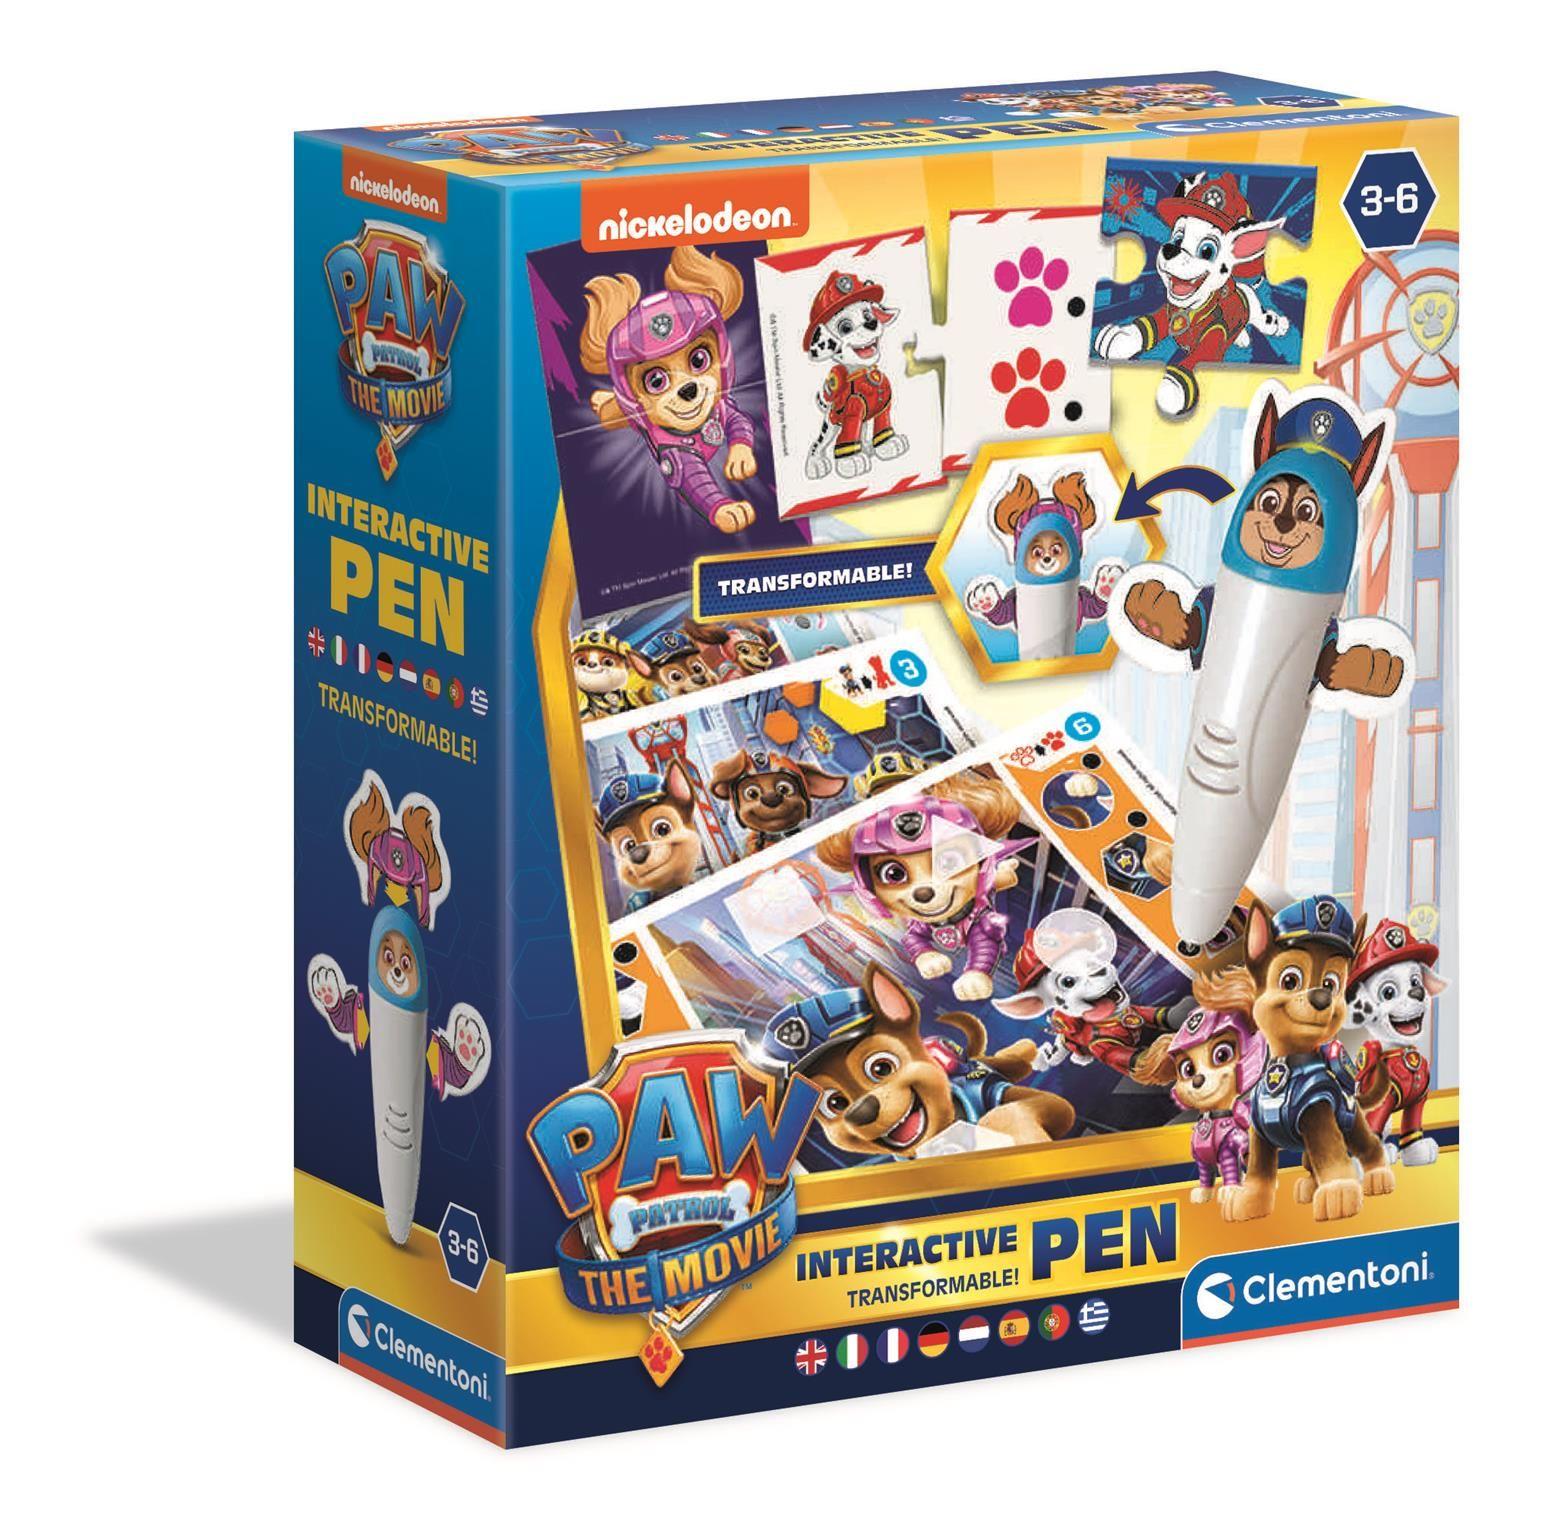 Clementoni: An Adventure with the PAW Patrol